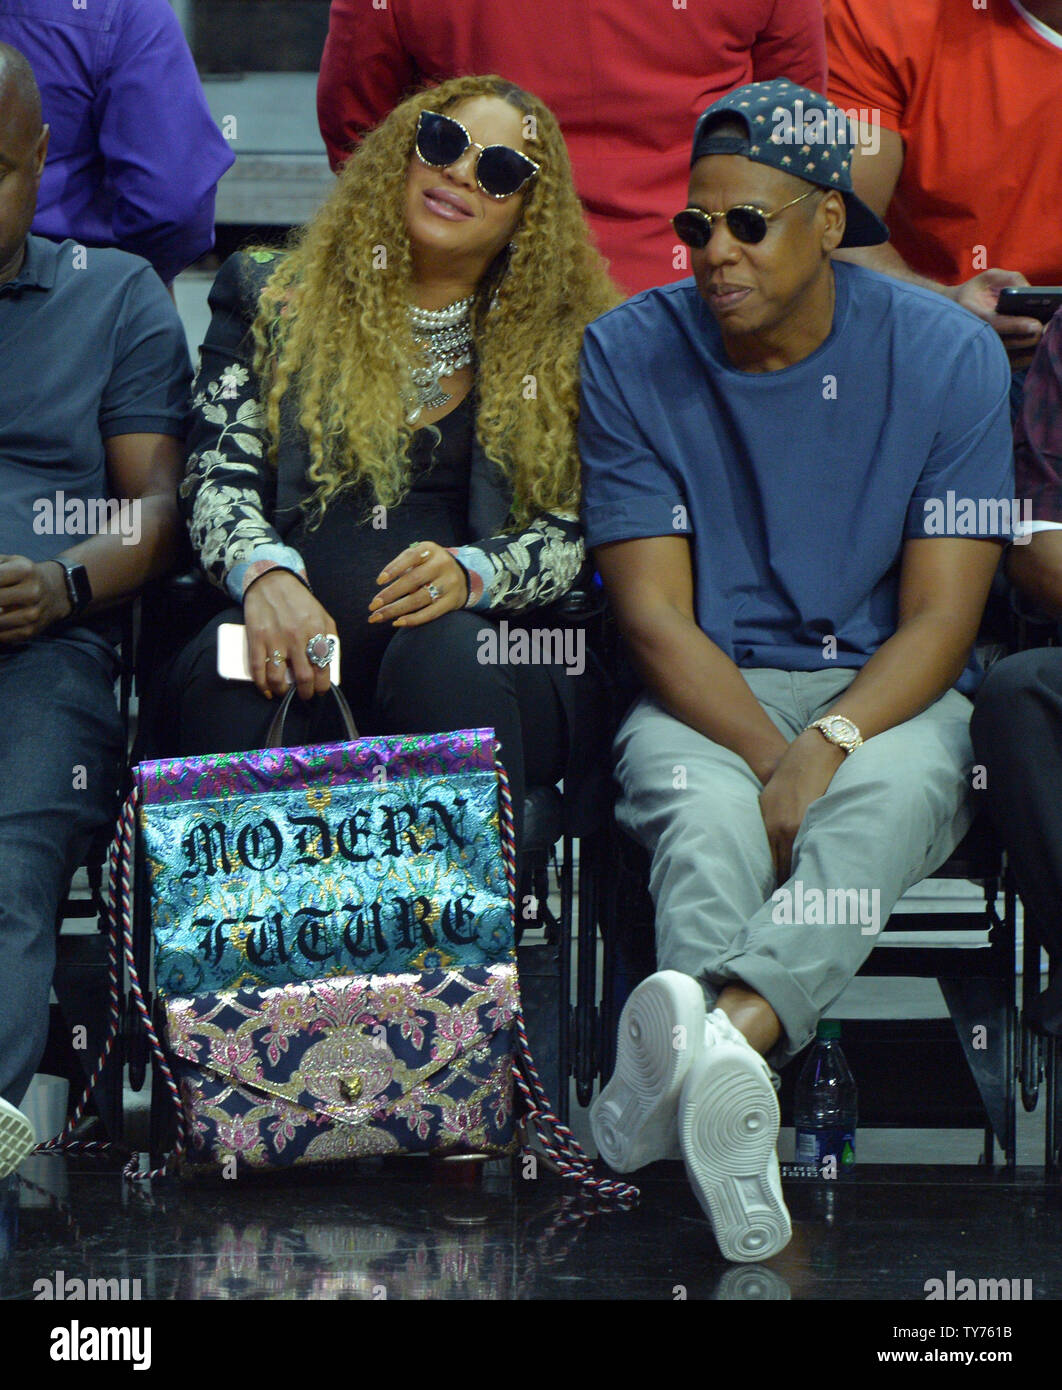 Beyonce and Jay Z sit courtside as they attend Game 7 of the best-of-seven first round playoffs between the Los Angeles Clippers and the Utah Jazz at Staples Center in Los Angeles on April 30, 2017. Beyonce Knowles and Shawn 'Jay Z' Carter have welcomed twins in one of the most highly anticipated celebrity births, according to multiple reports Sunday. One of those reports was granddad himself, Matthew Knowles, who blasted the news on Twitter with a Father's Day post reading 'They're here!' and 'Happy Birthday to the twins!'  File Photo by Jim Ruymen/UPI Stock Photo